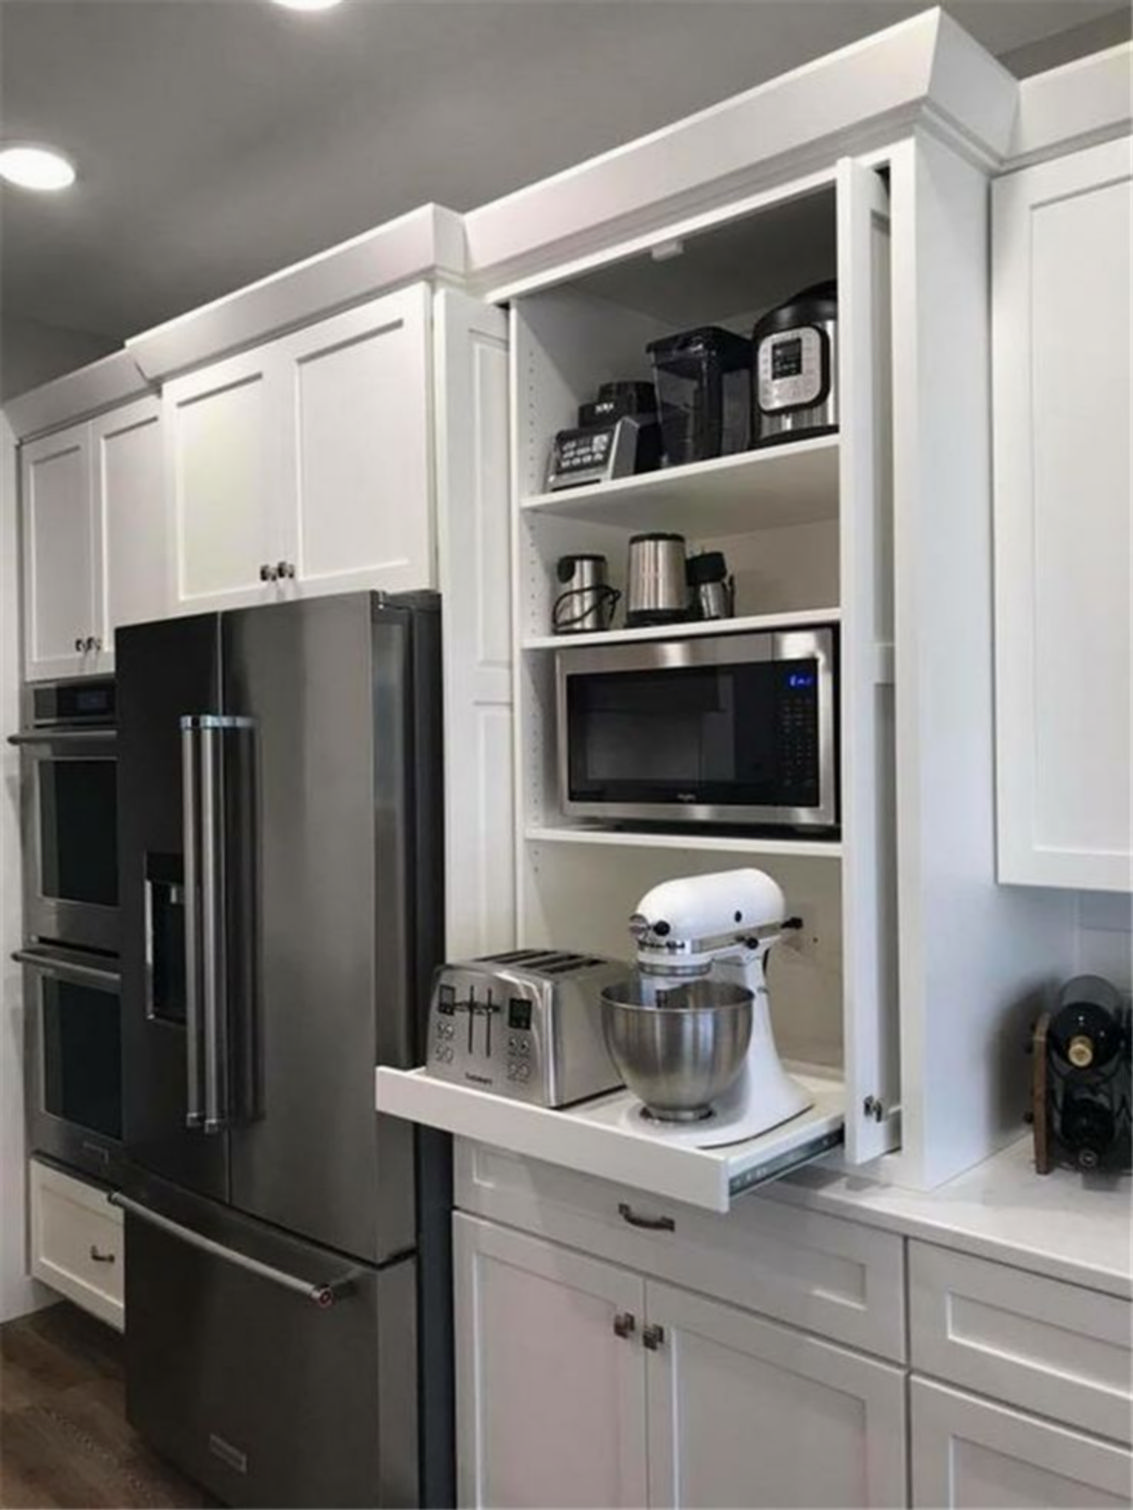 Make a small kitchen even bigger by maximizing the hidden cabinets and drawers 1